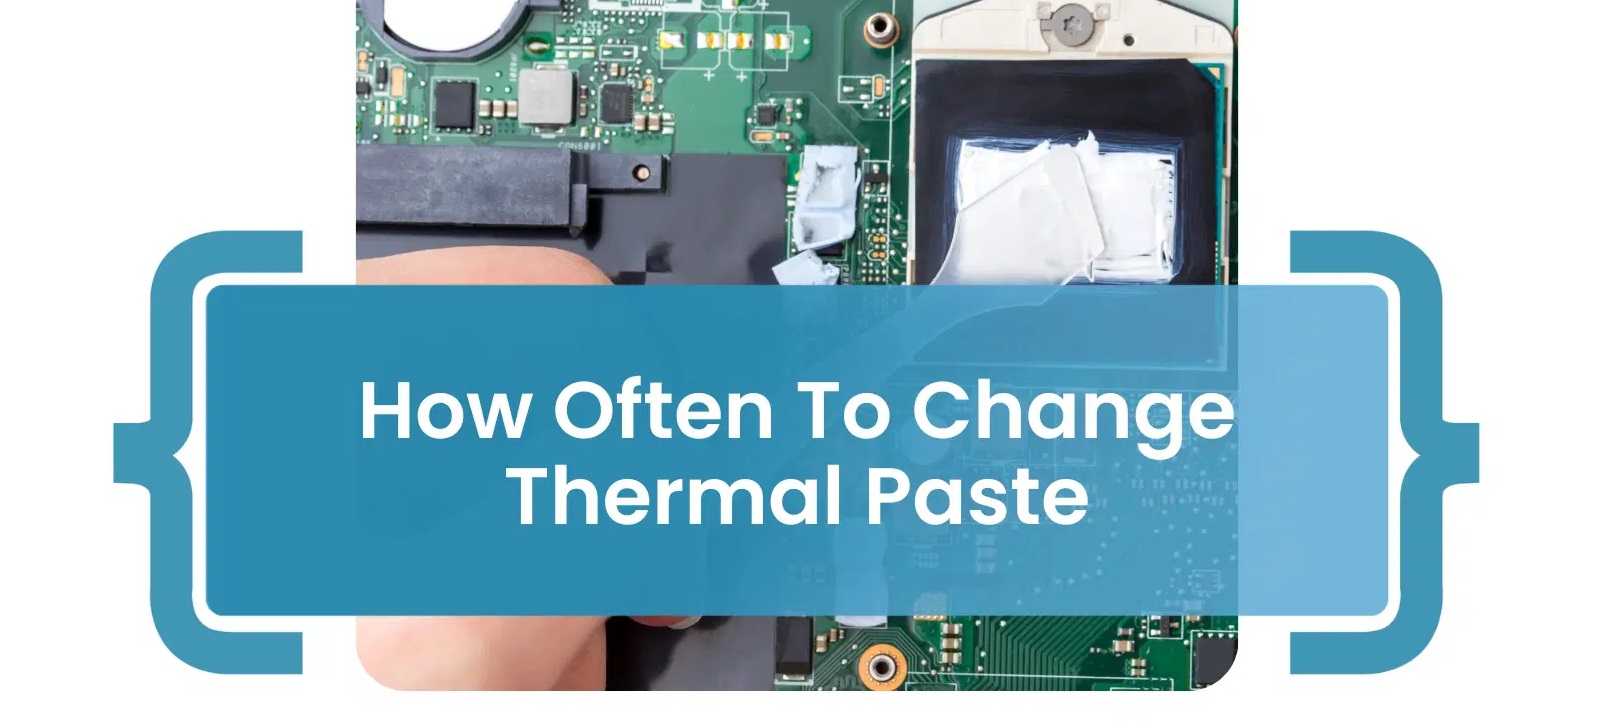 How Often Should You Change Thermal Paste On CPU